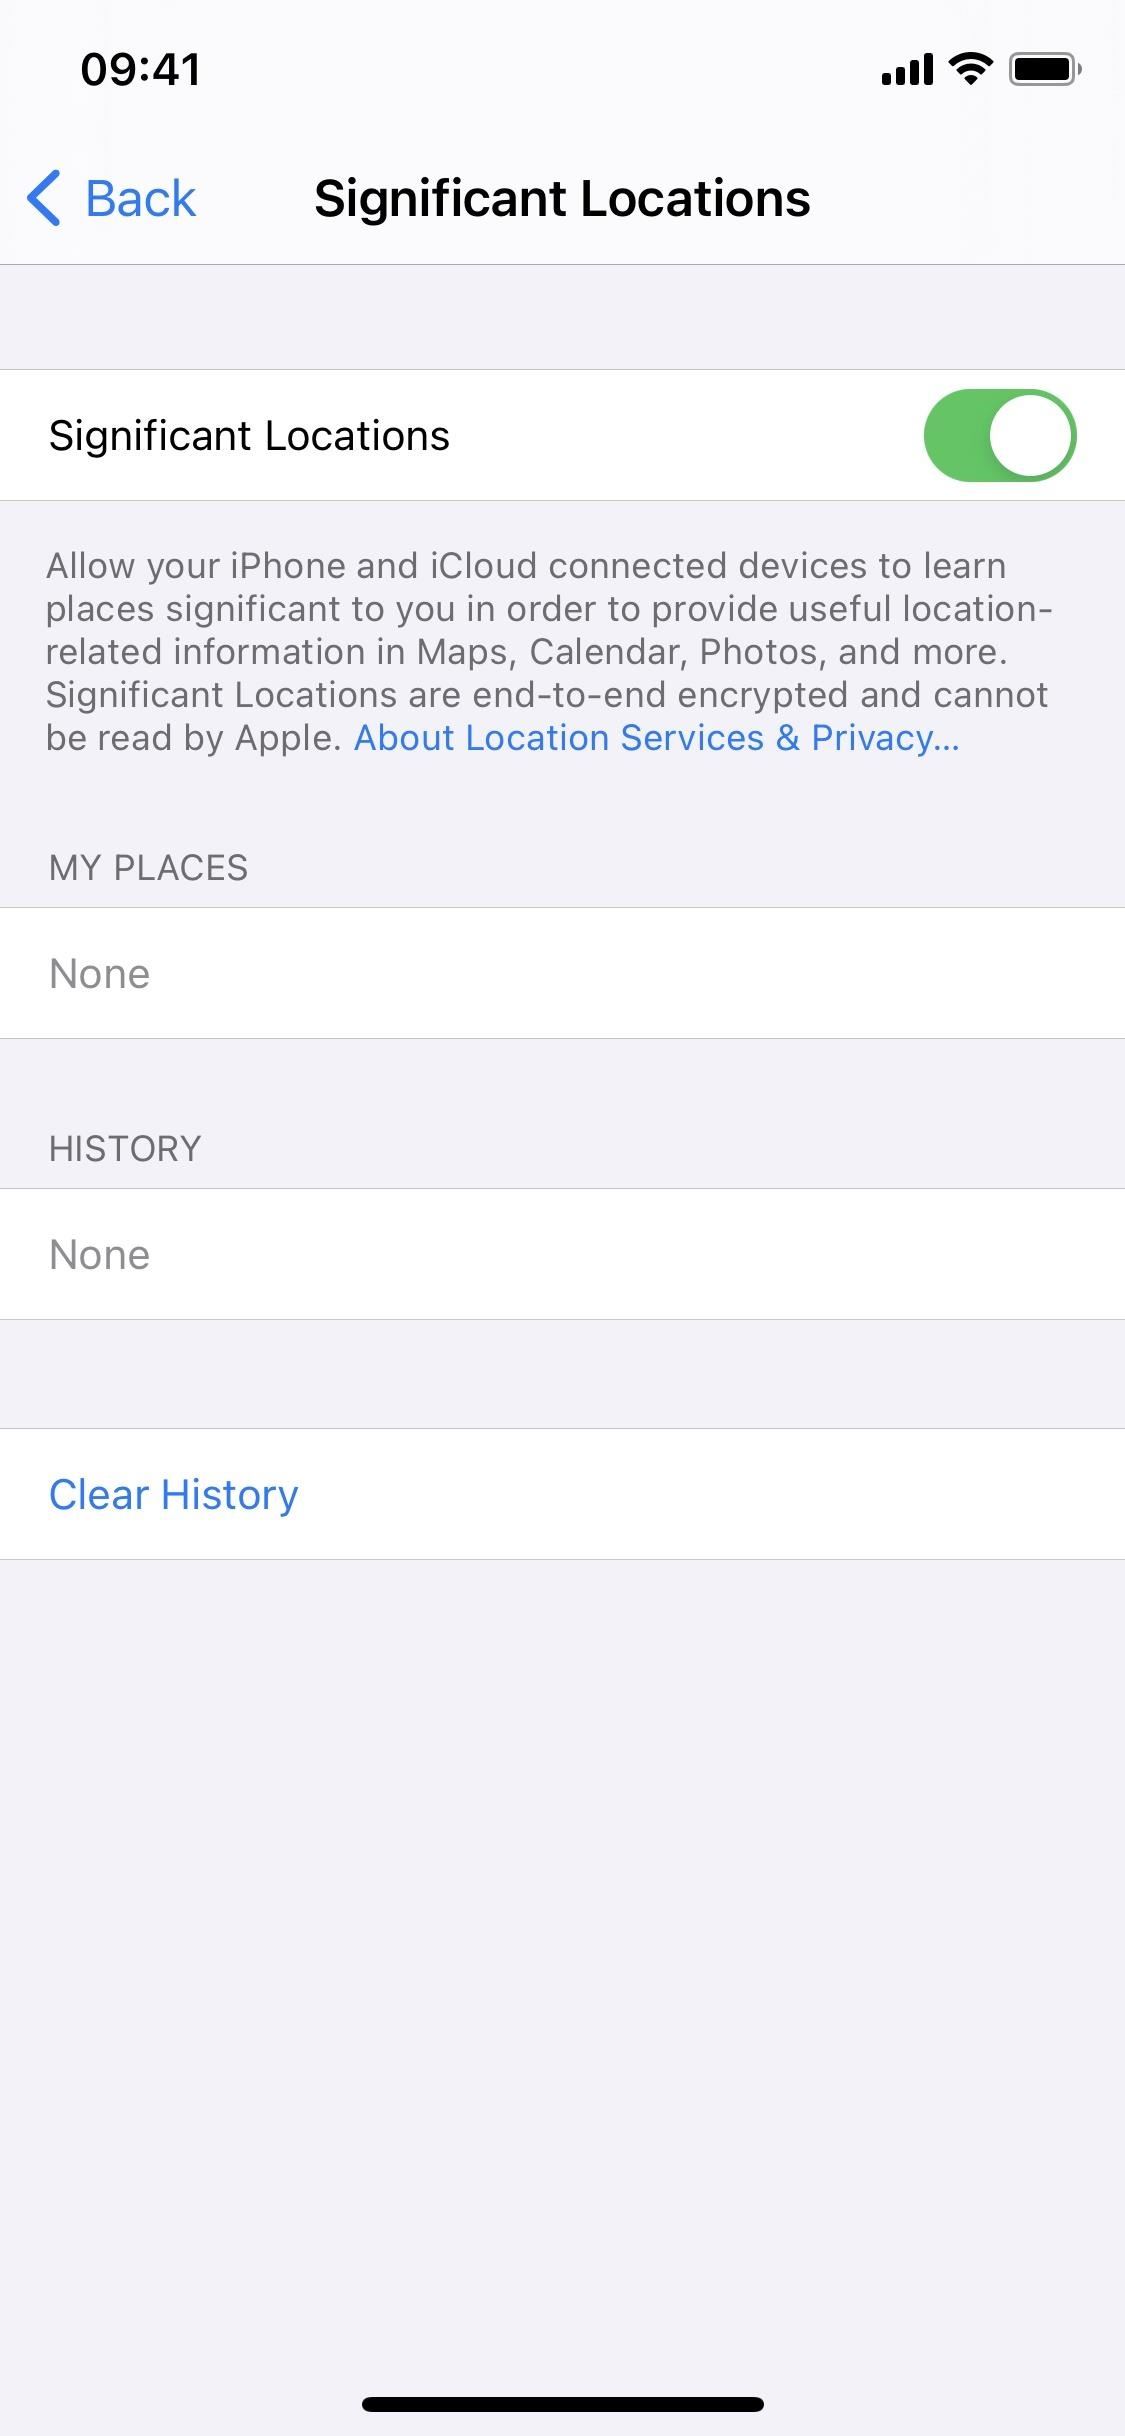 Your iPhone Uses a Hidden Tracker to Keep Tabs on Your Recent & Most Visited Locations — But You Can Stop It